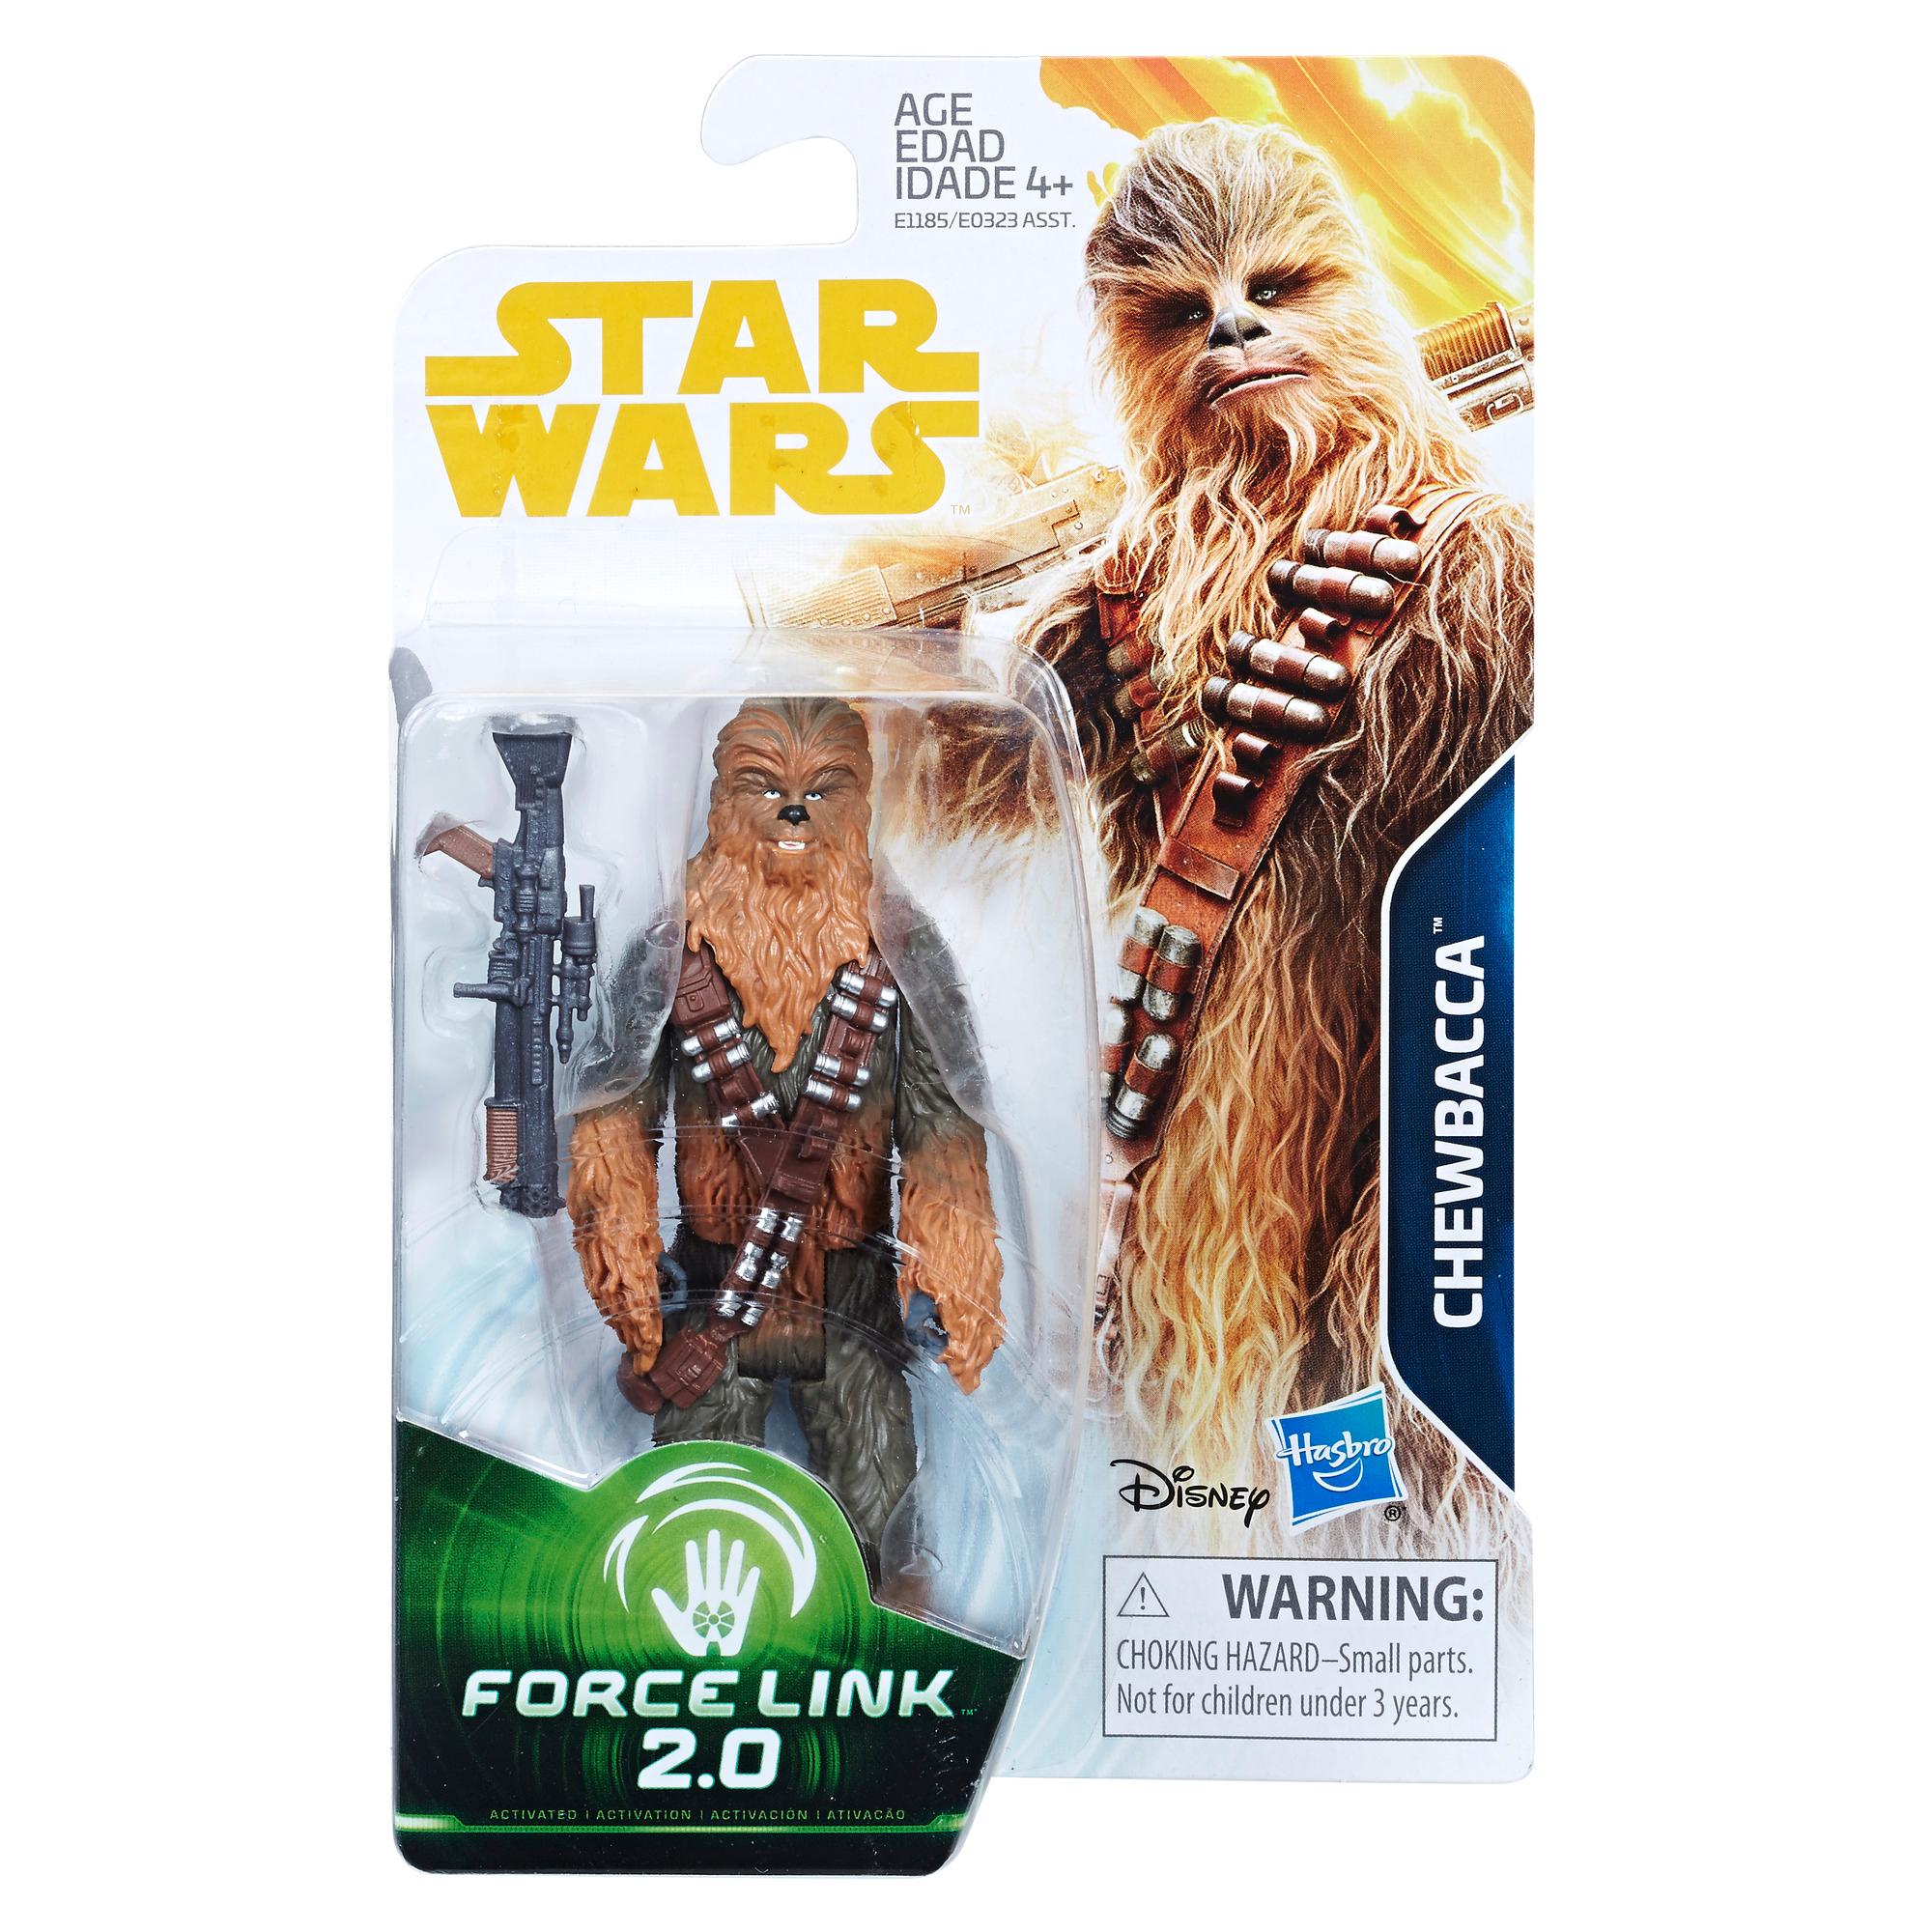 Star Wars Solo Movie Force Link 2.0 3.75" Chewbacca